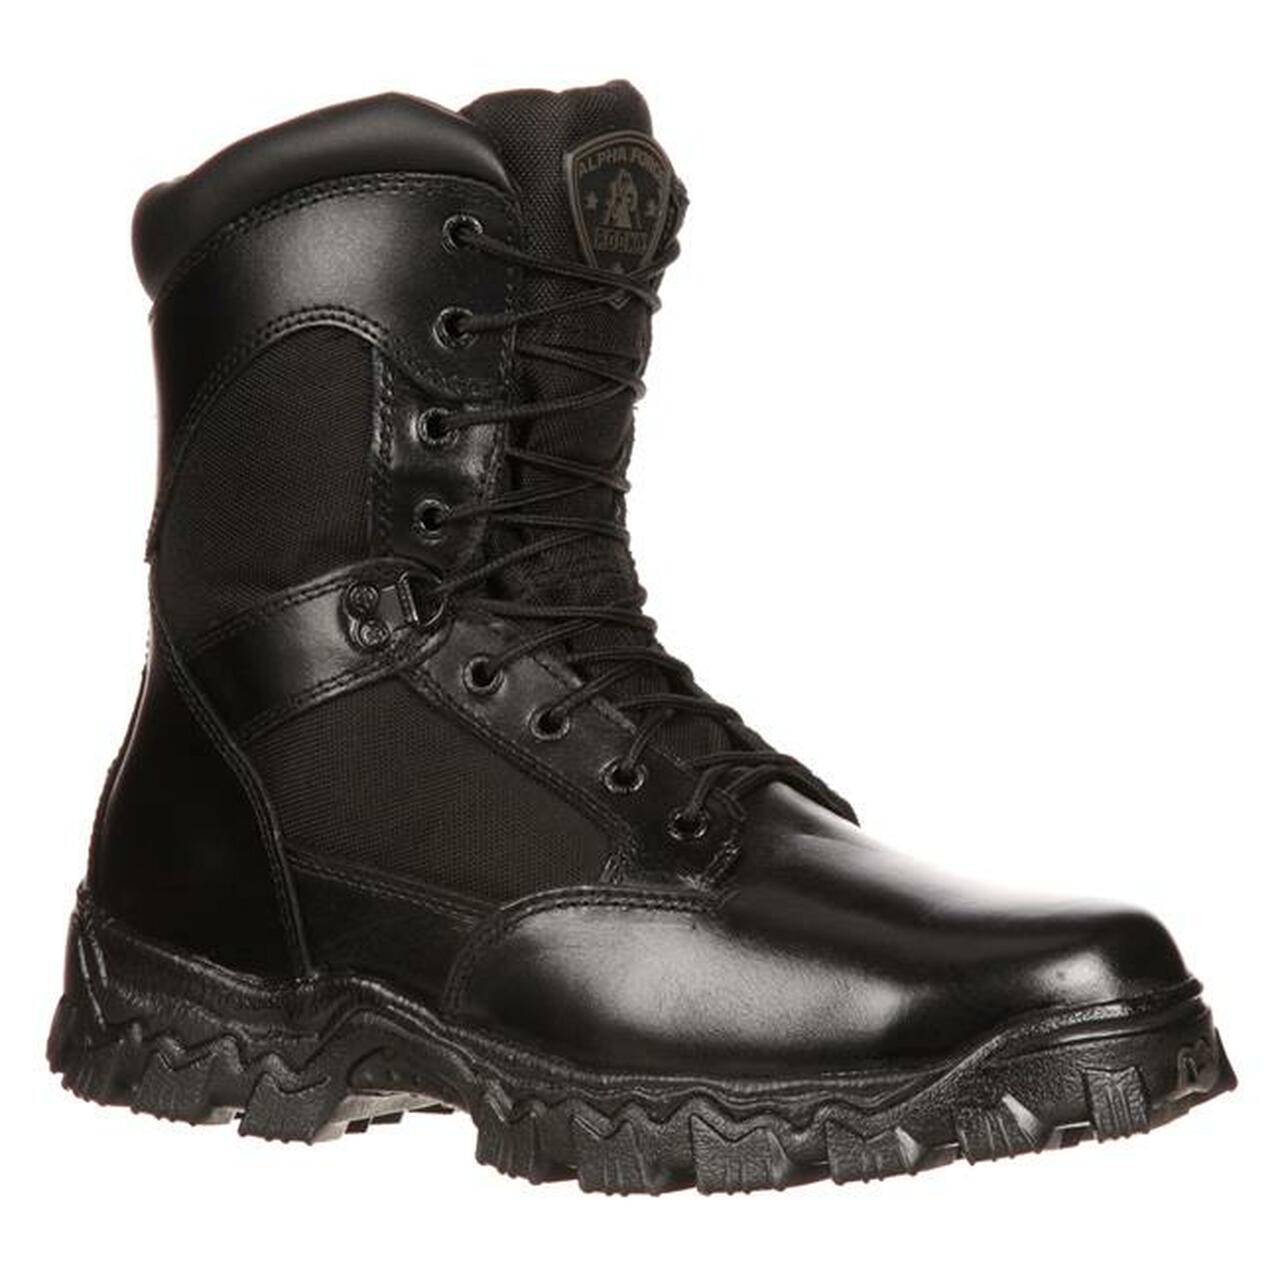 Rocky Alpha Force Waterproof 400G Insulated Public Service Boot